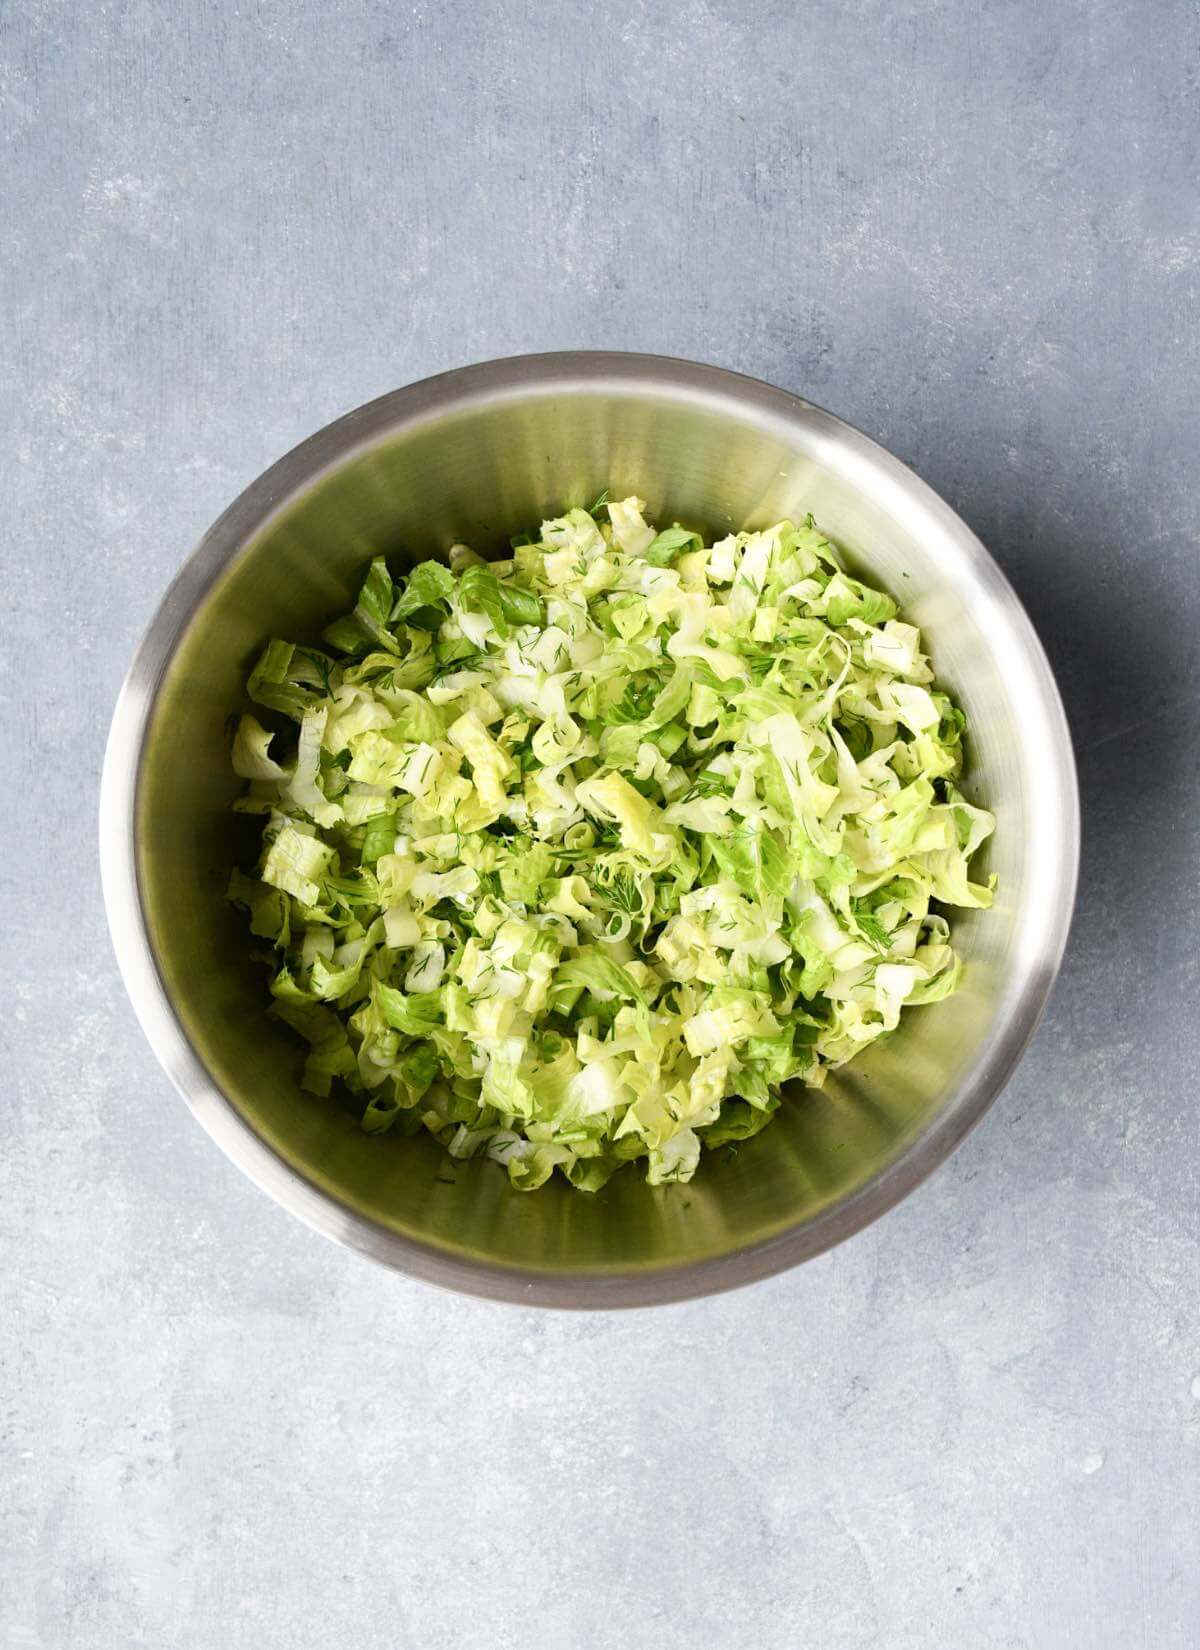 chopped romaine lettuce, green onions and fresh dill in a large bowl.